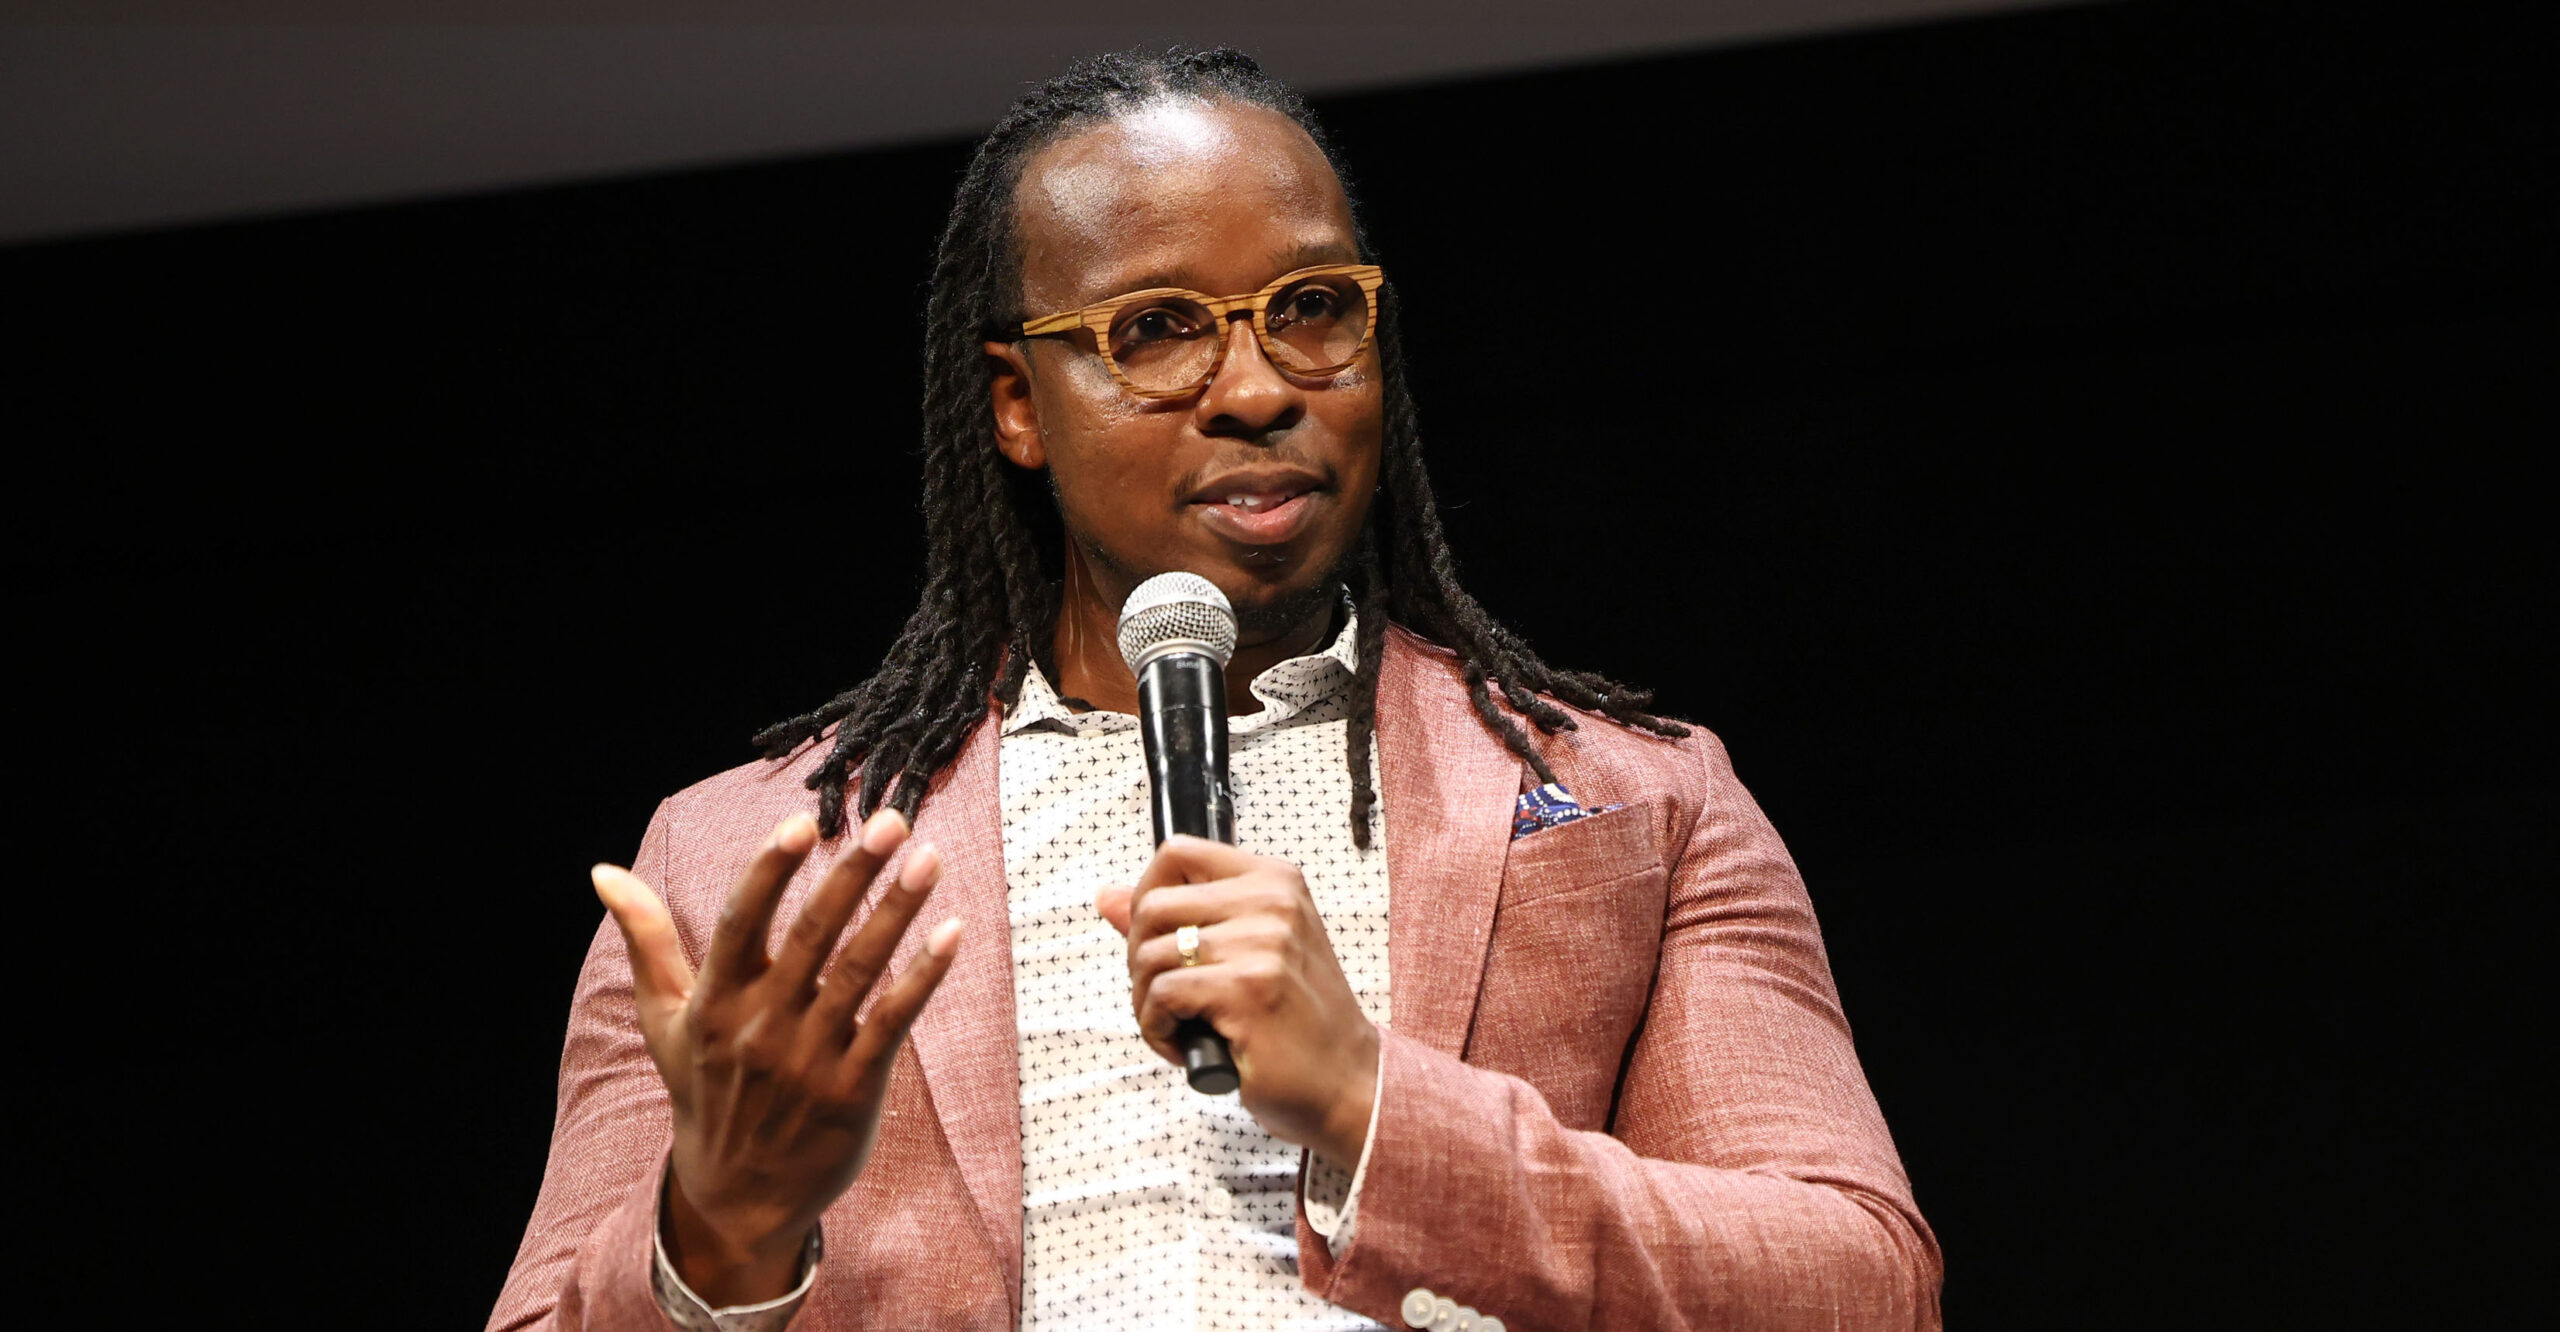 Ibram X. Kendi's 'Anti-Racism' Center Imploded. Let's Make Sure His Grift Doesn't Continue to Poison Our Society.